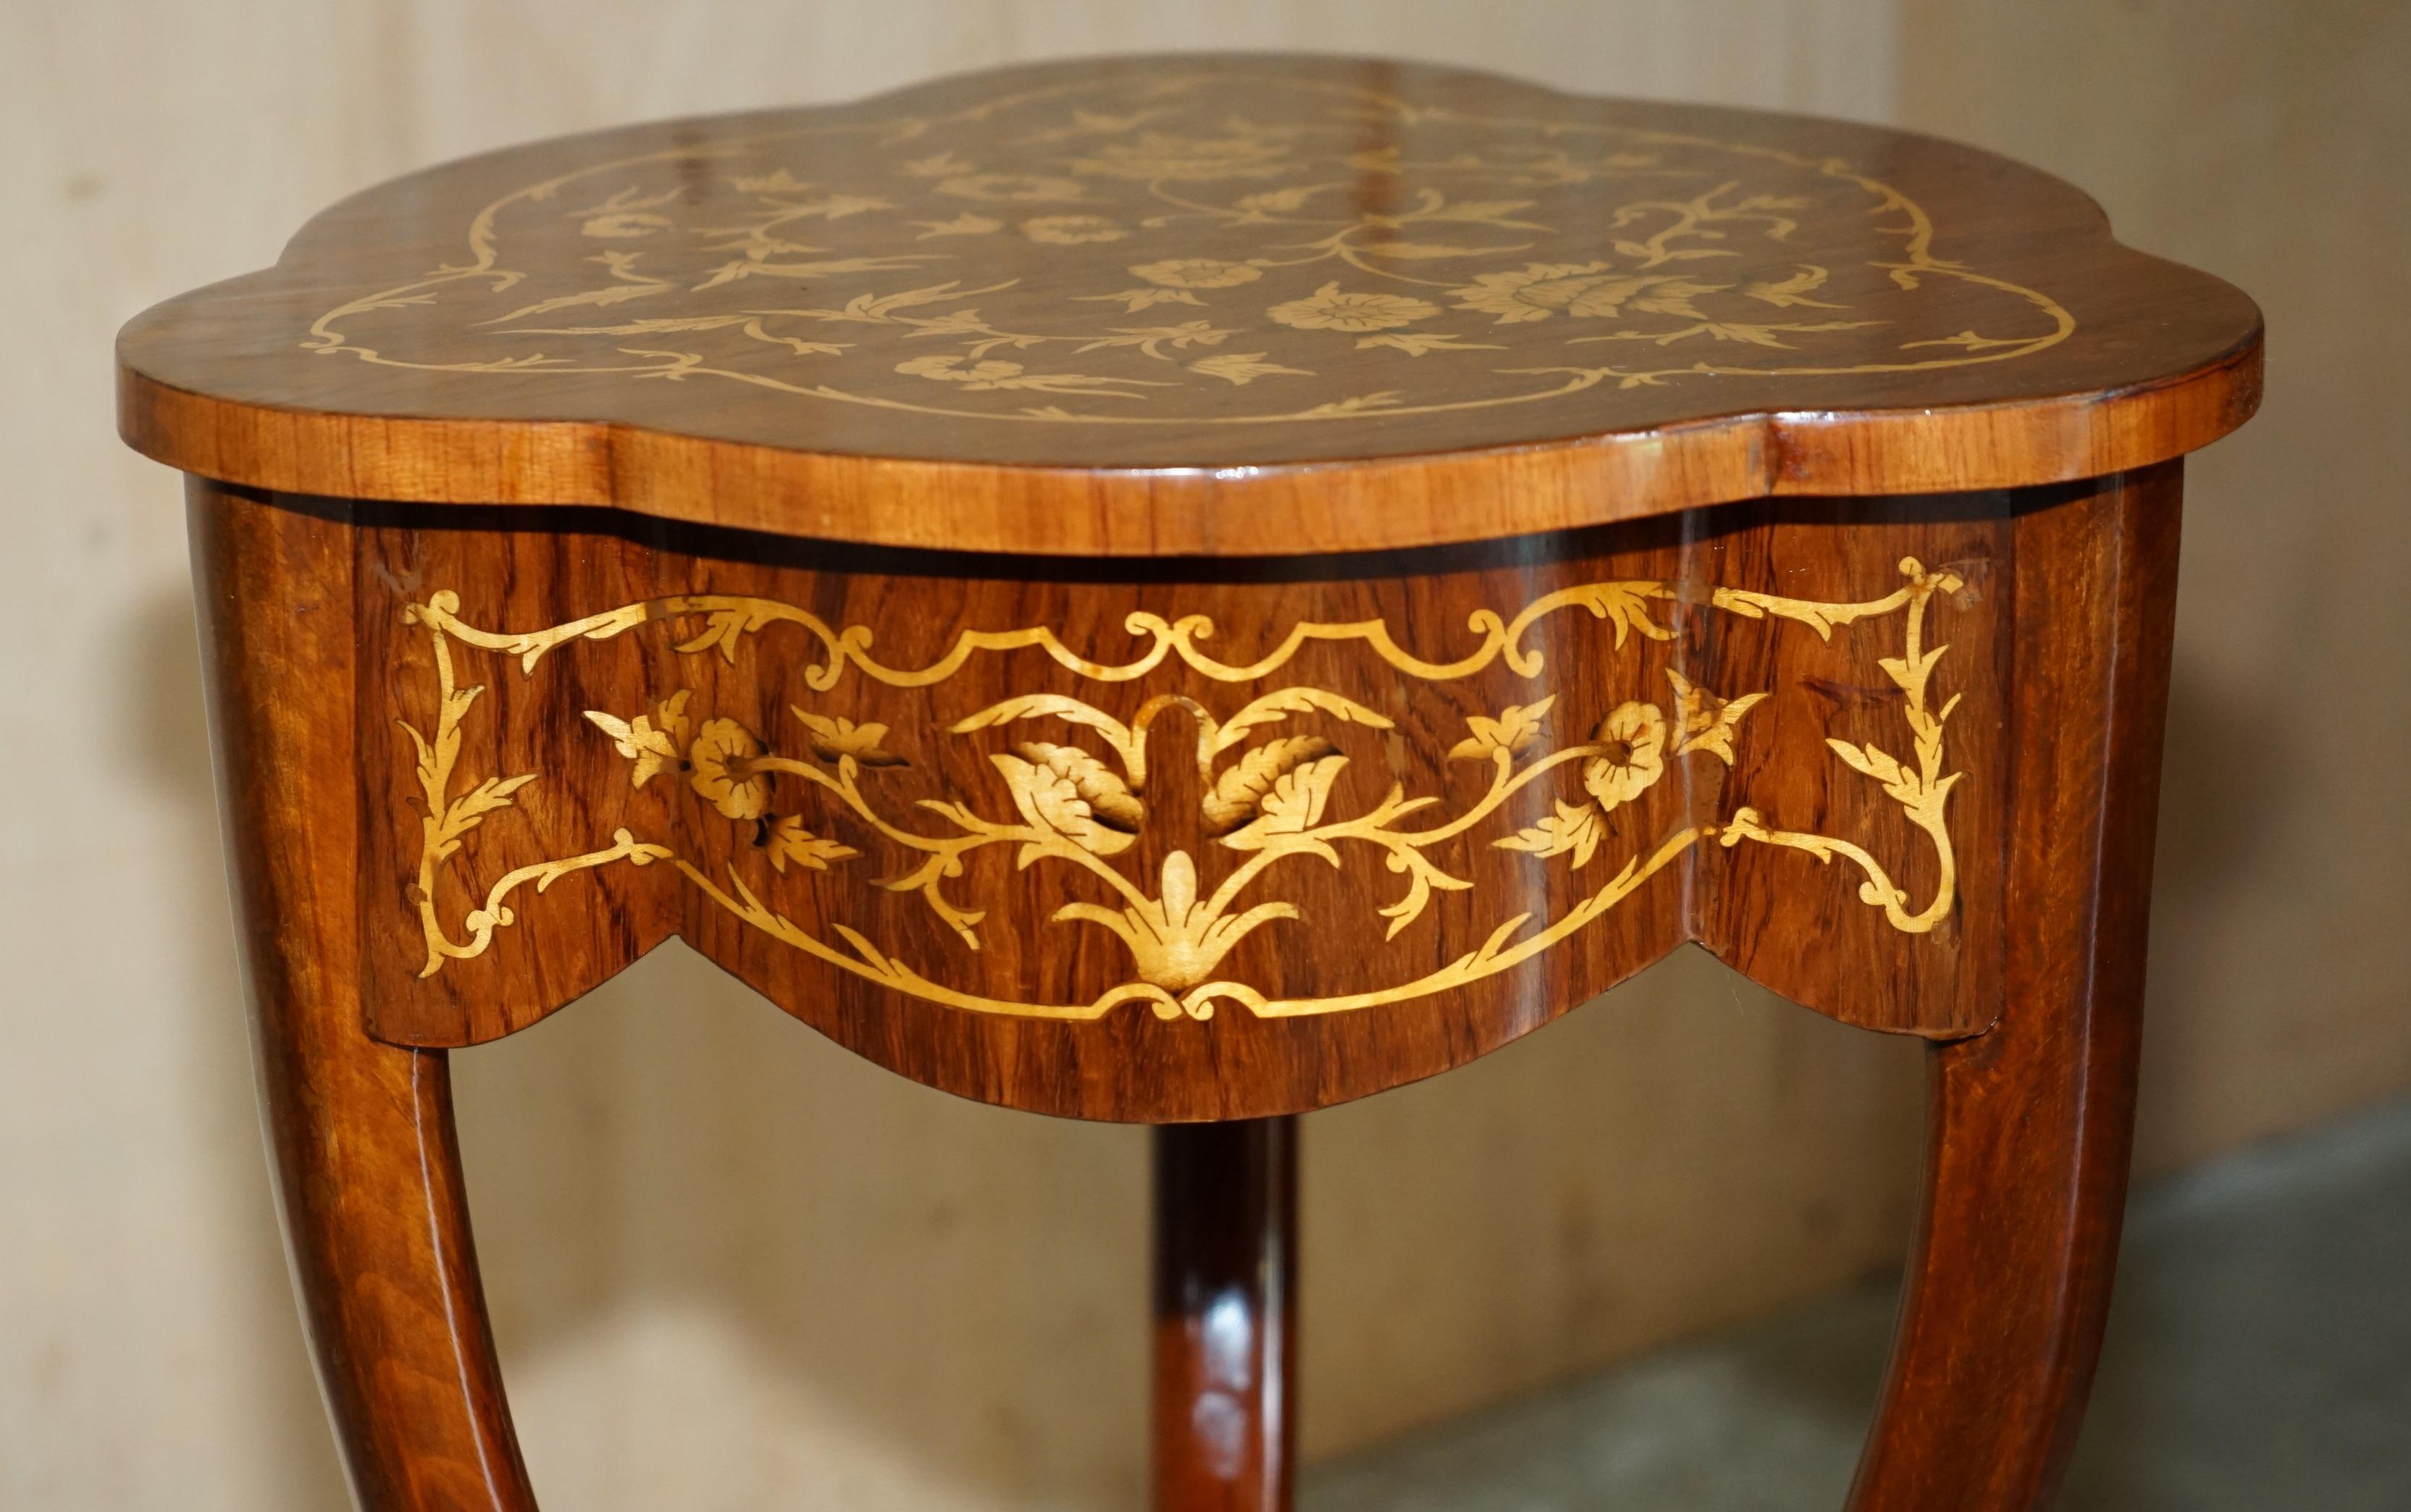 PAIR OF ART DECO STYLE SYCAMORE WOOD & WALNUT INLAID PEDESTAL SIDE END TABLEs For Sale 6